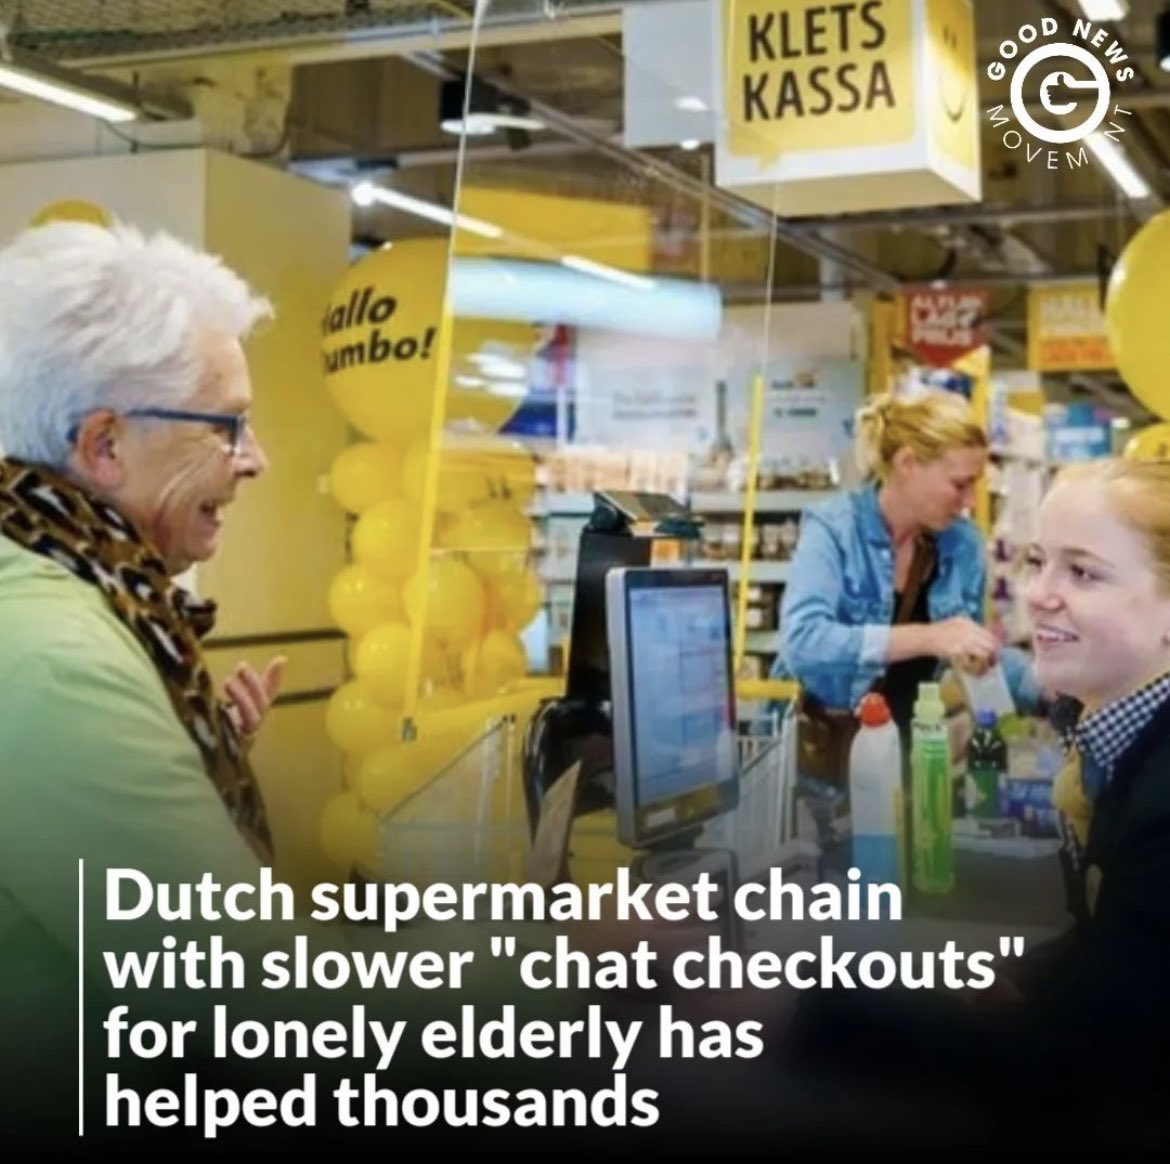 Jumbo, a Netherlands based supermarket chain with over 700 stores, introduced a Kletskassa in 200 of its stores, which translates to “chat checkout.” It is a special lane for customers who are not in a rush and could use a little extra chat time with the cashier #socialcare